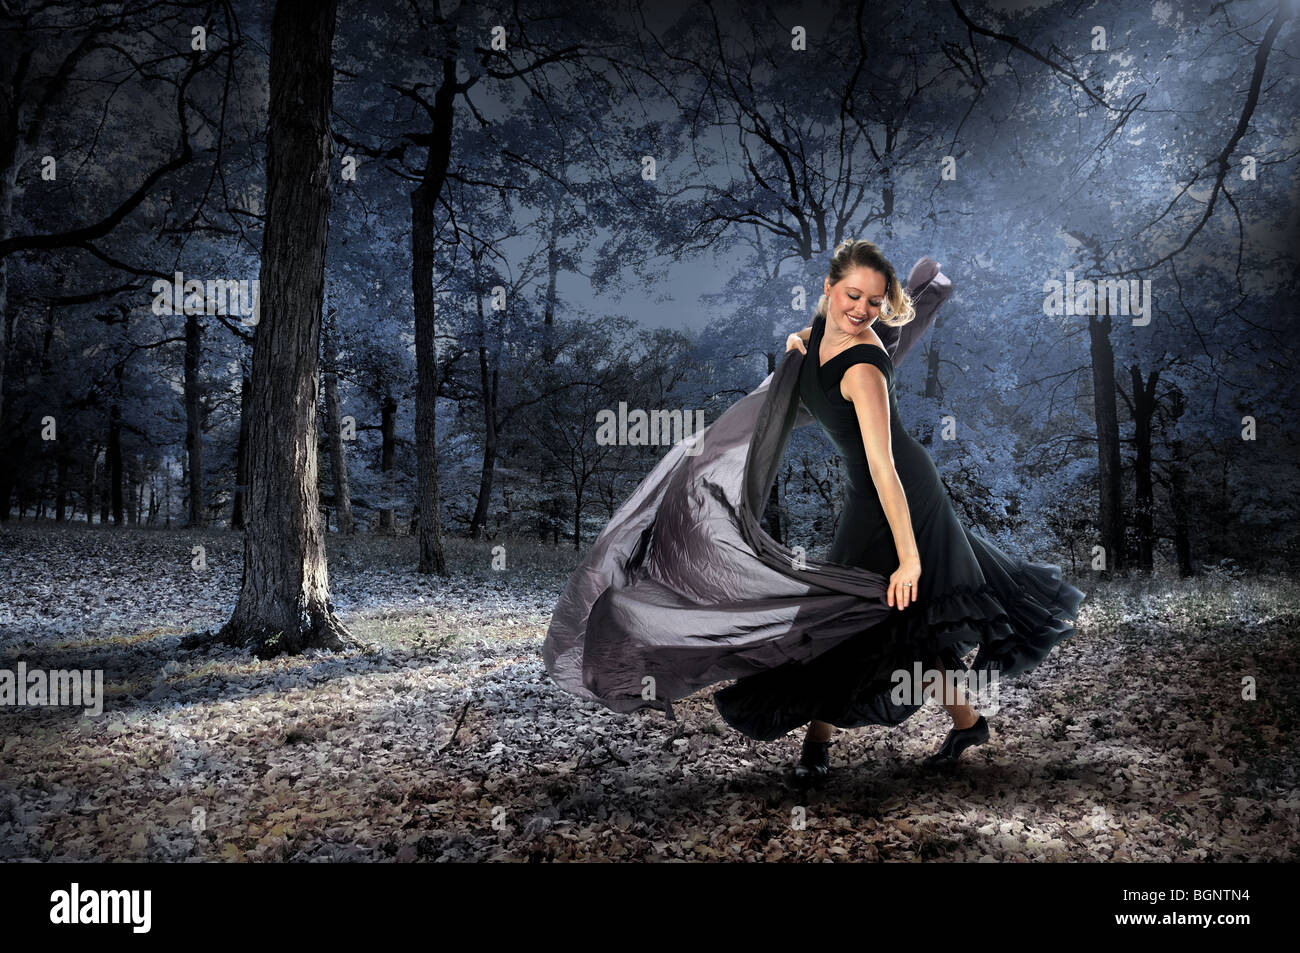 Beautiful woman dancing in the forest during moonlight Stock Photo